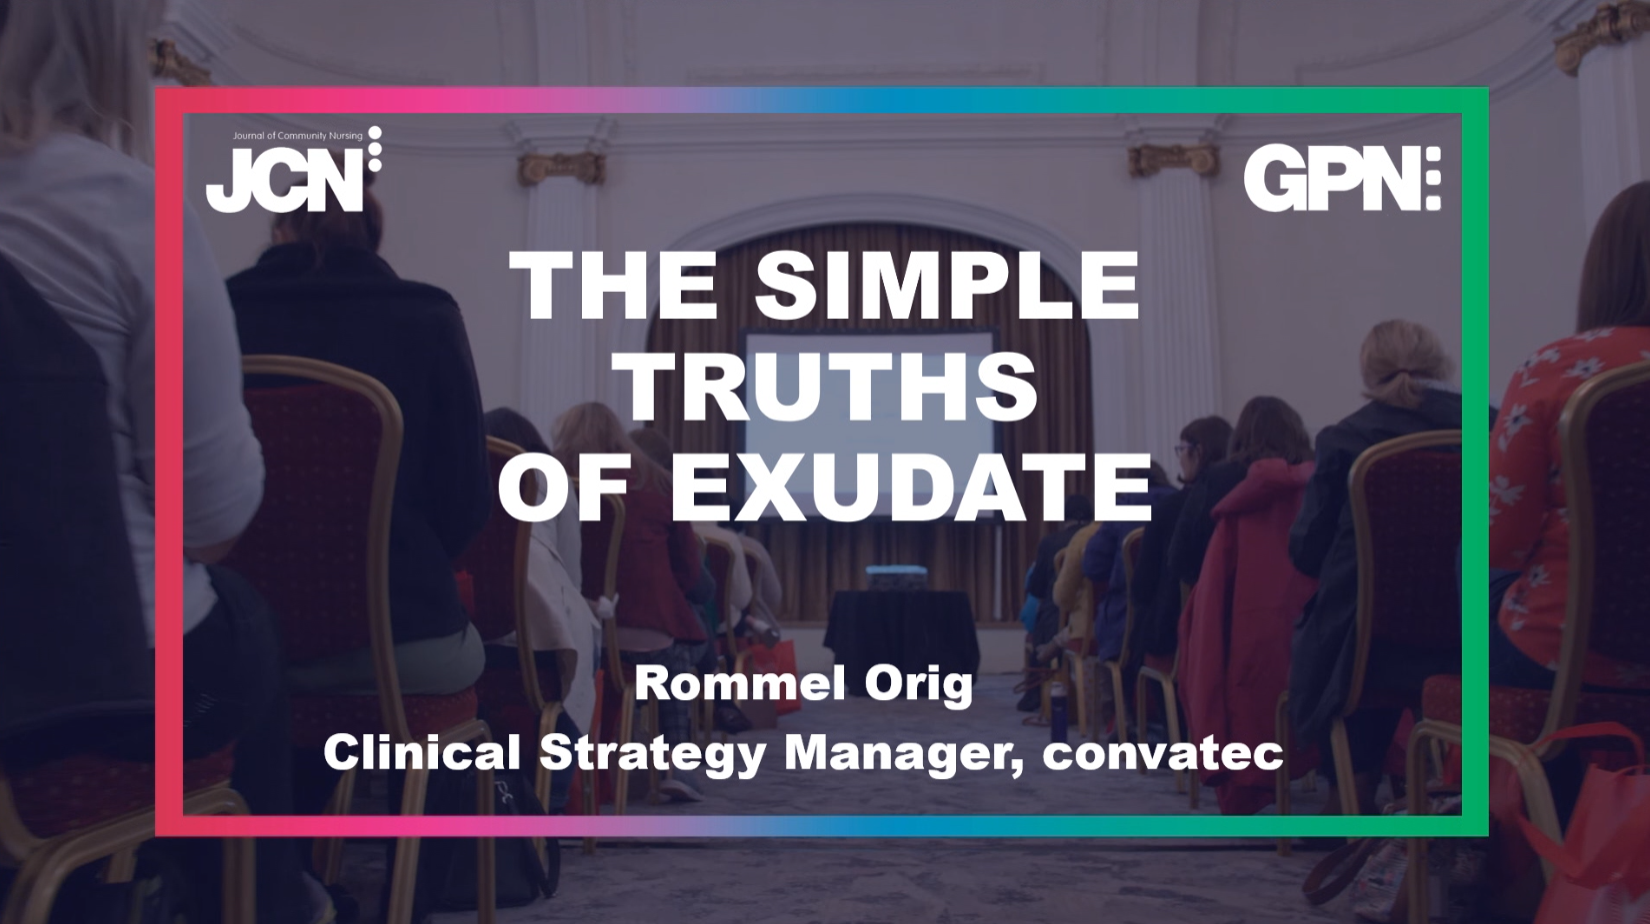 The simple truths of exudate (JCN Roadshows 2022)